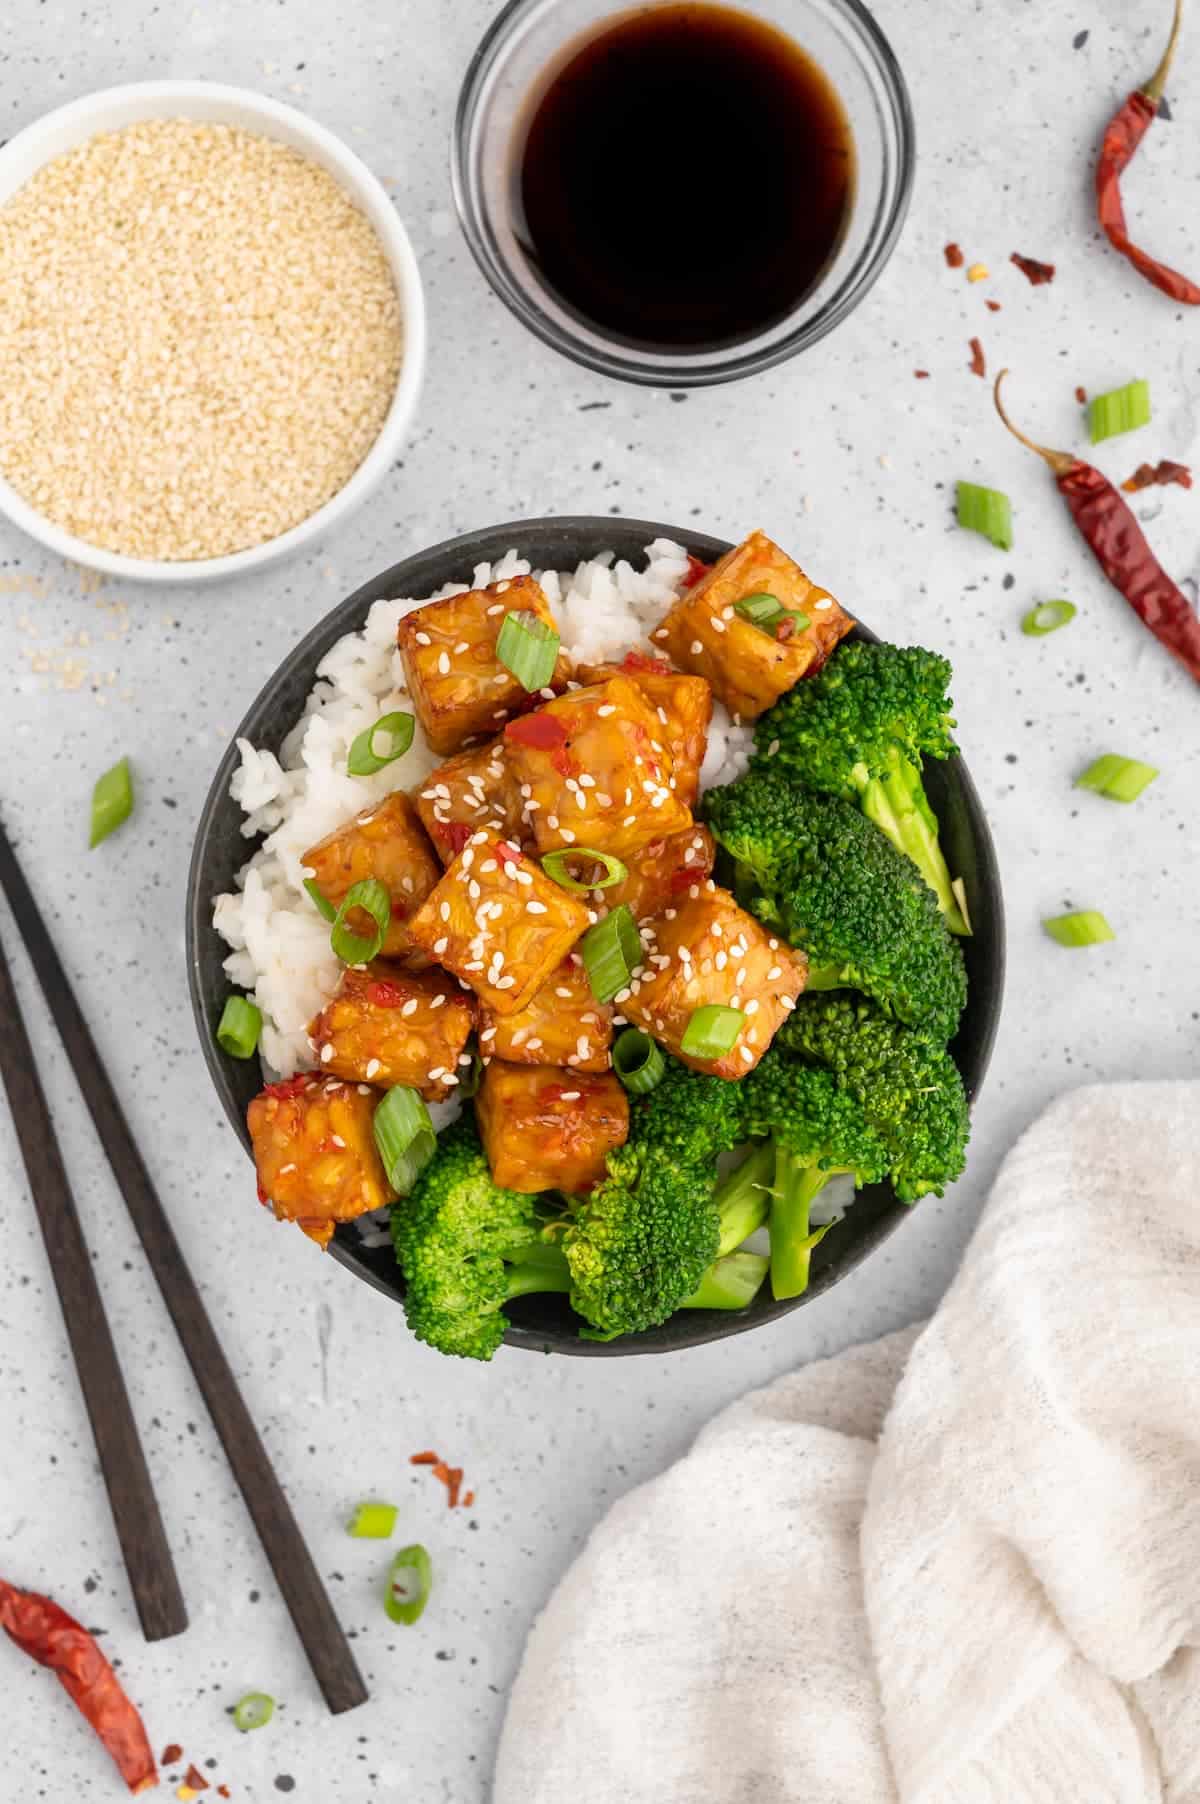 A bowl of air-fryer tempeh with broccoli and rice.